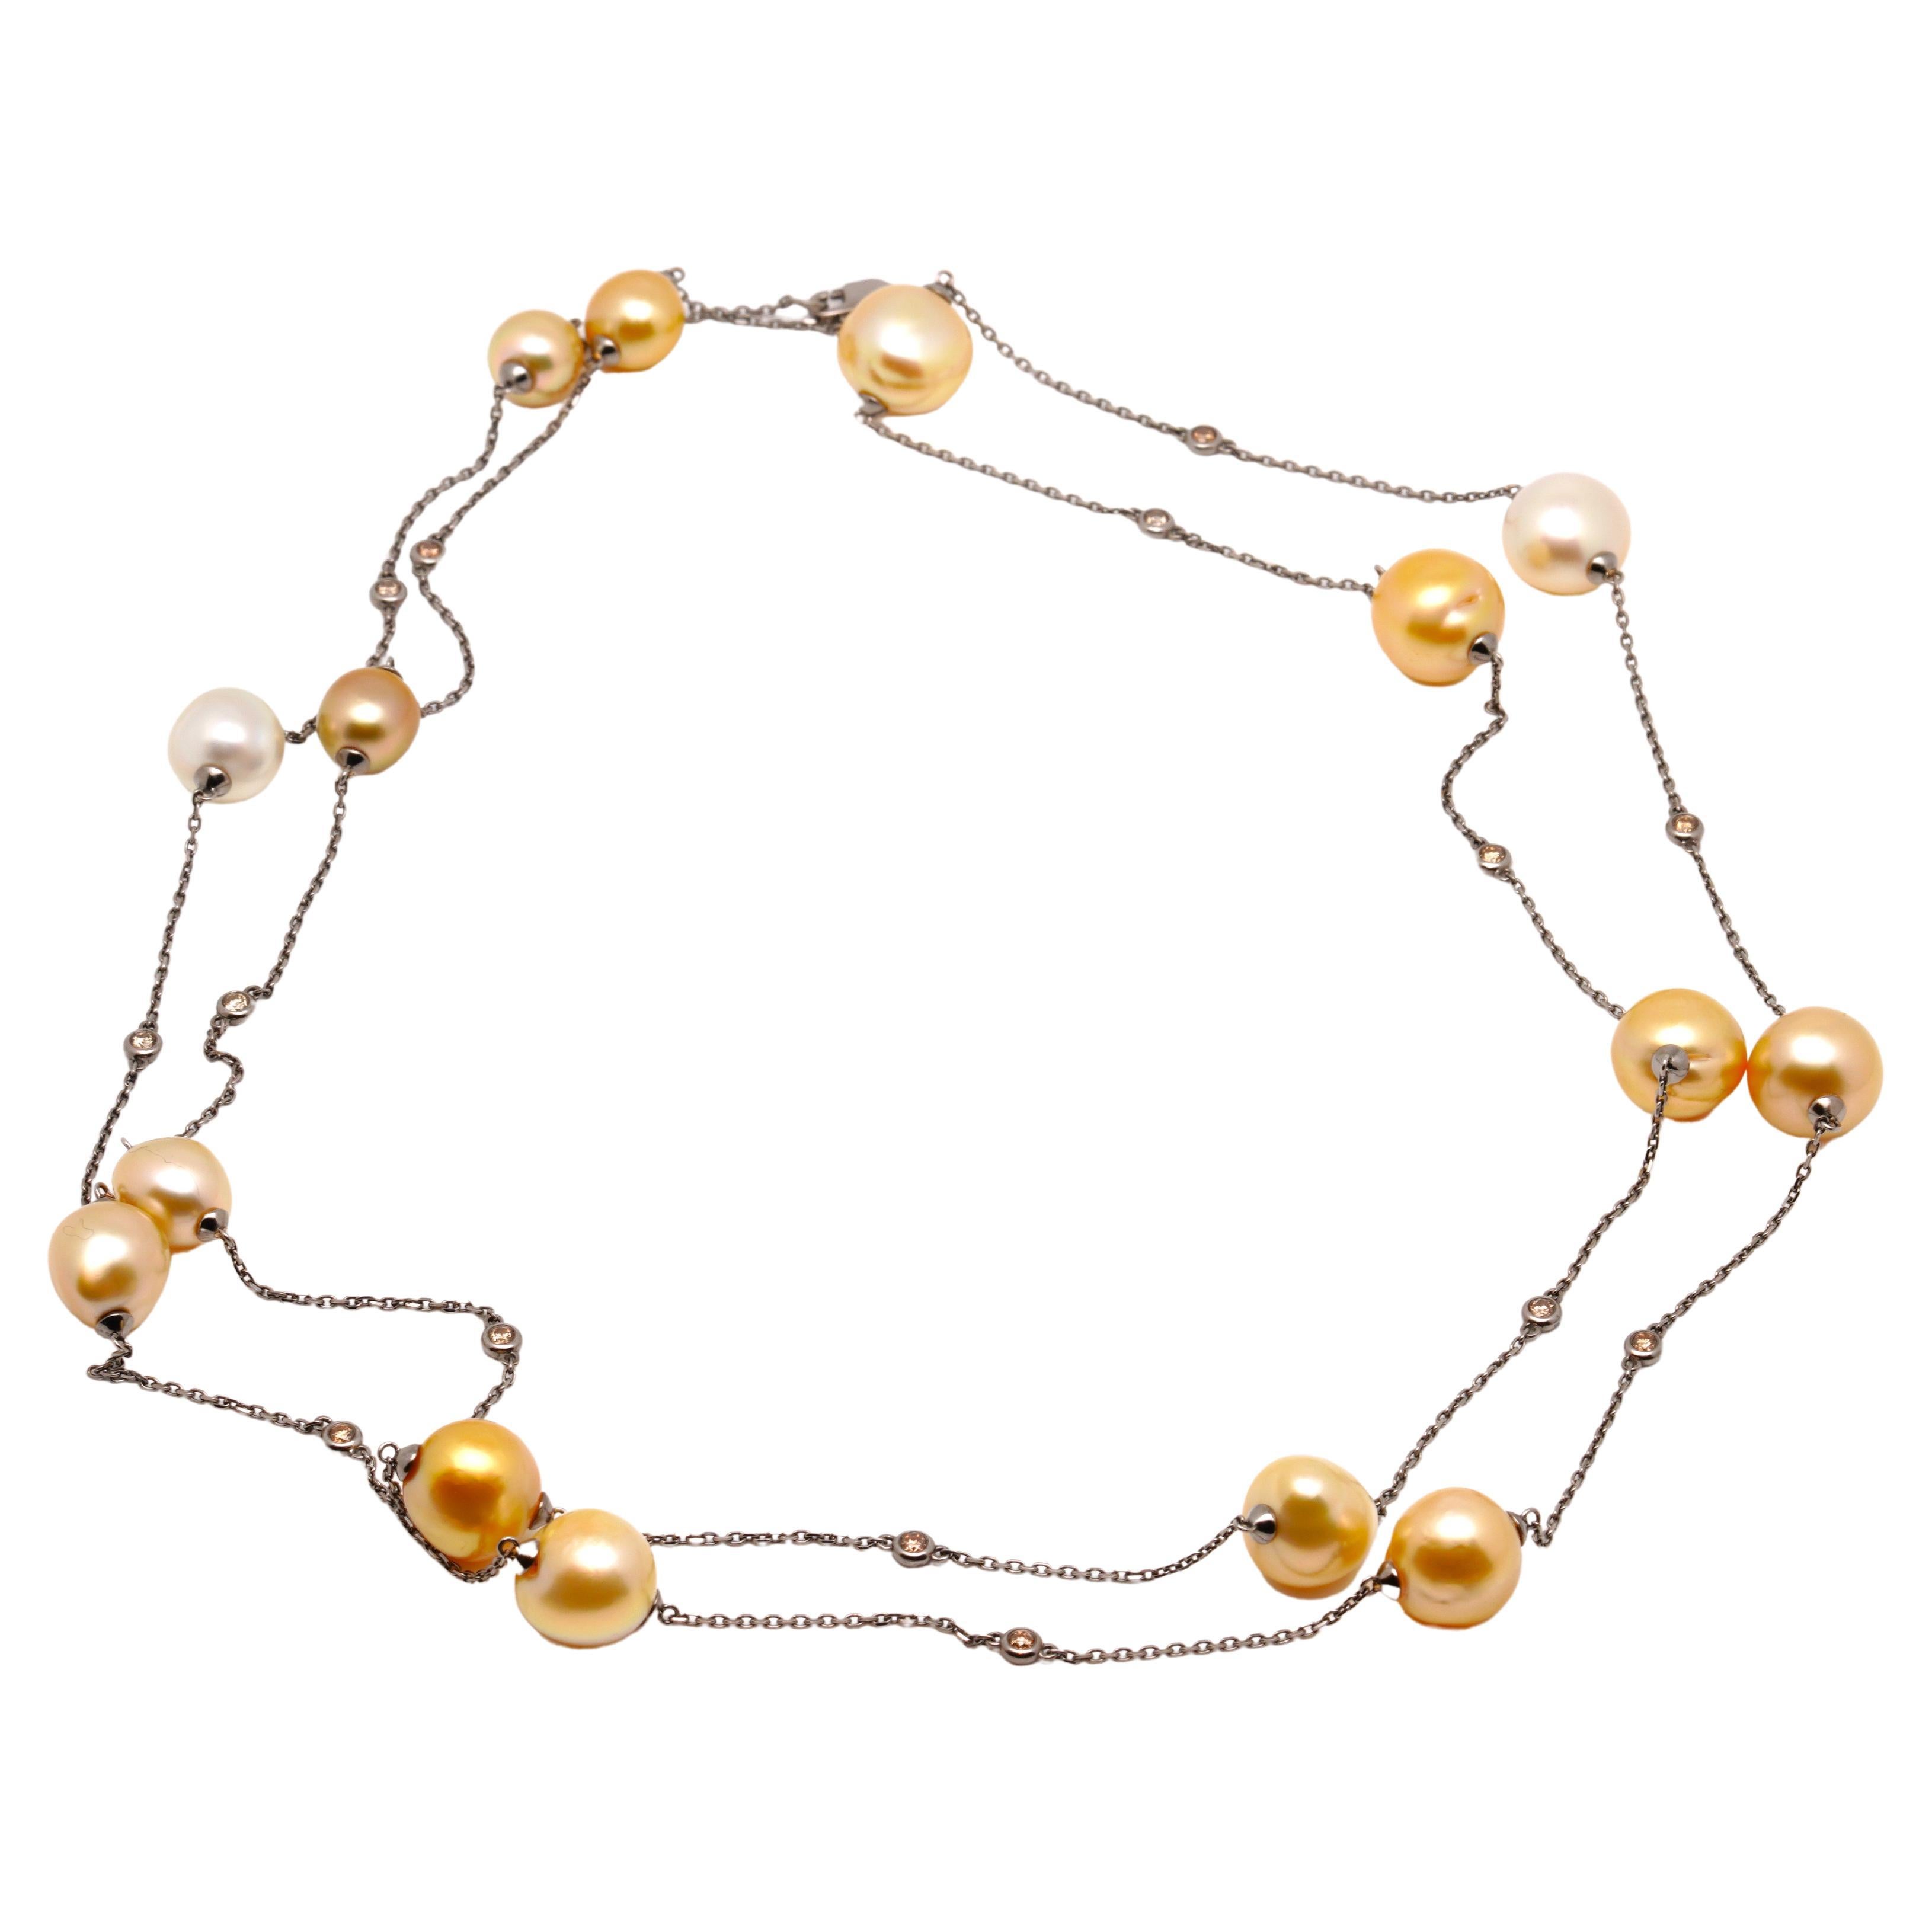 Gold South Sea Pearl & Diamond Necklace, 18K Gold, Austy Lee